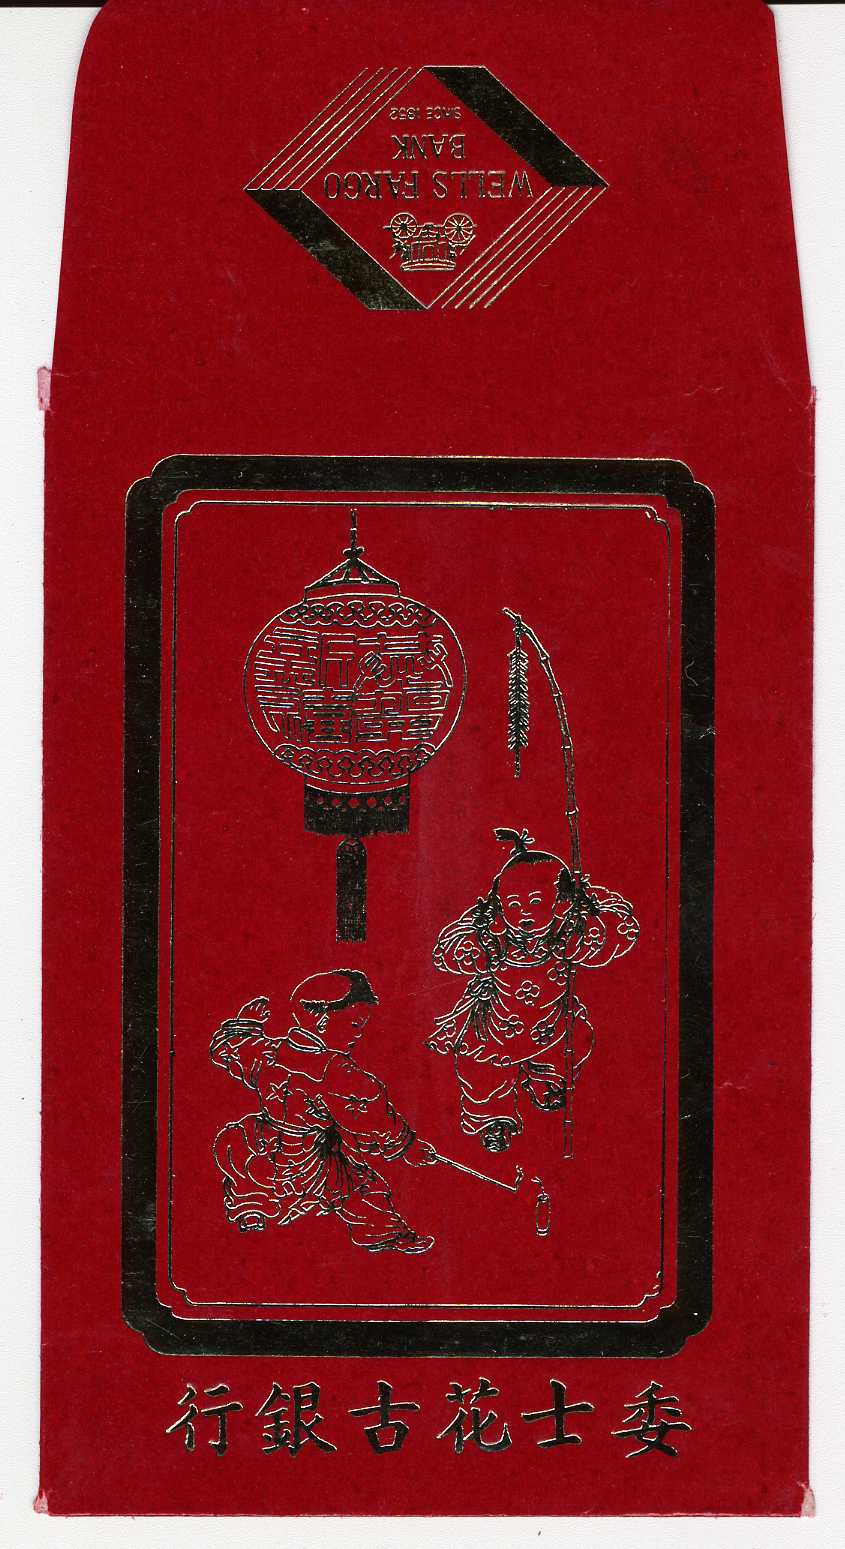 Red envelope with black ink design of two people and a lantern. Image link will enlarge image.